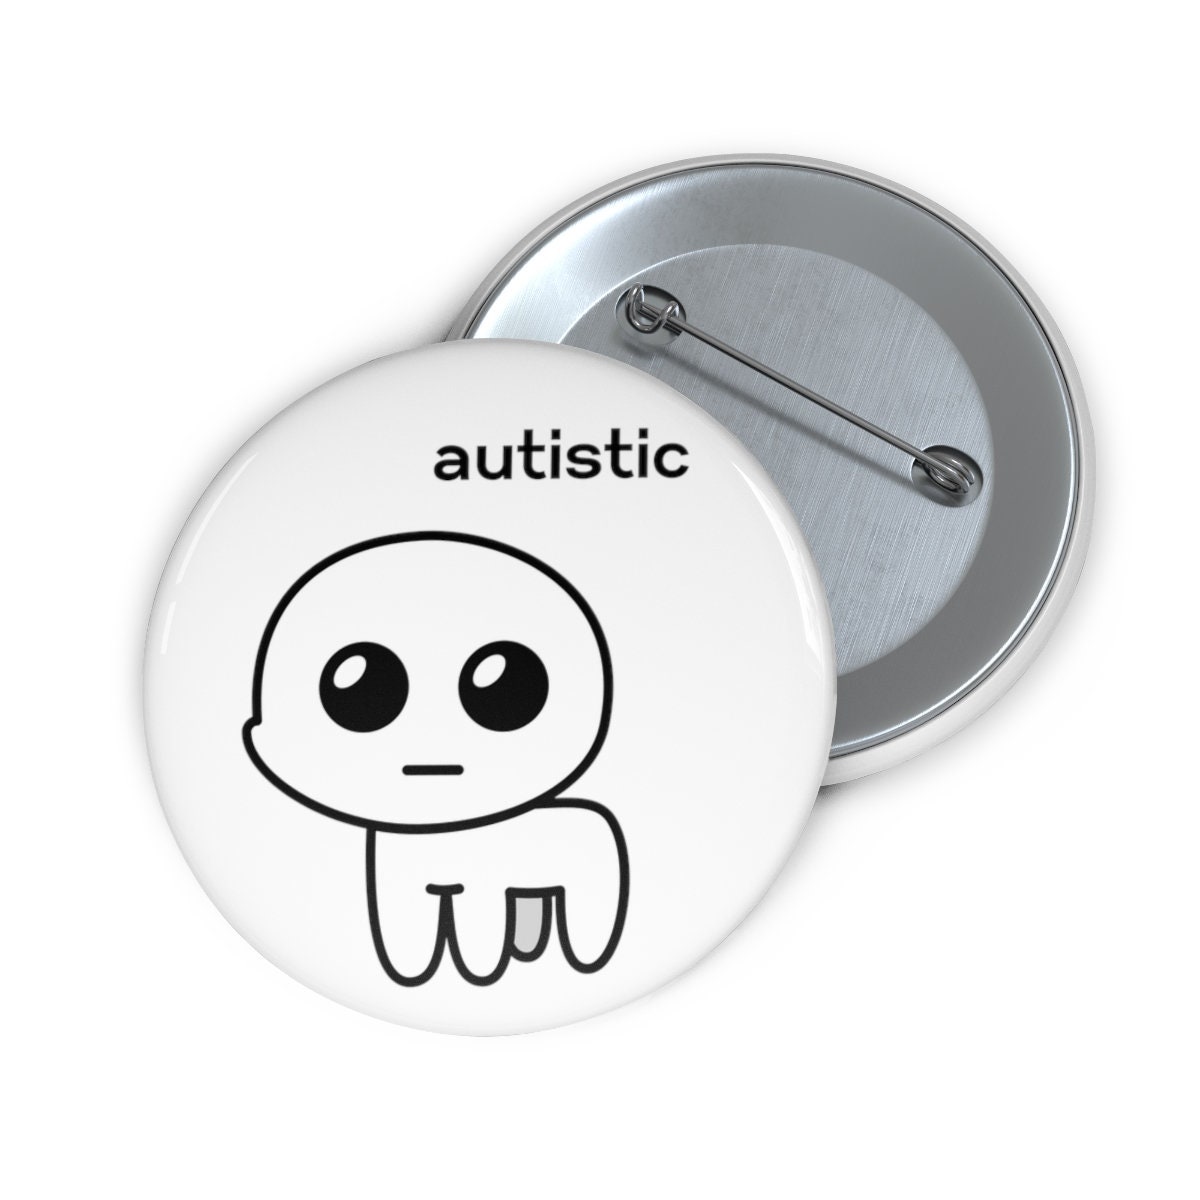 To Be Honest TBH Creature Badge Brooch Enamel Pin Autism Soft